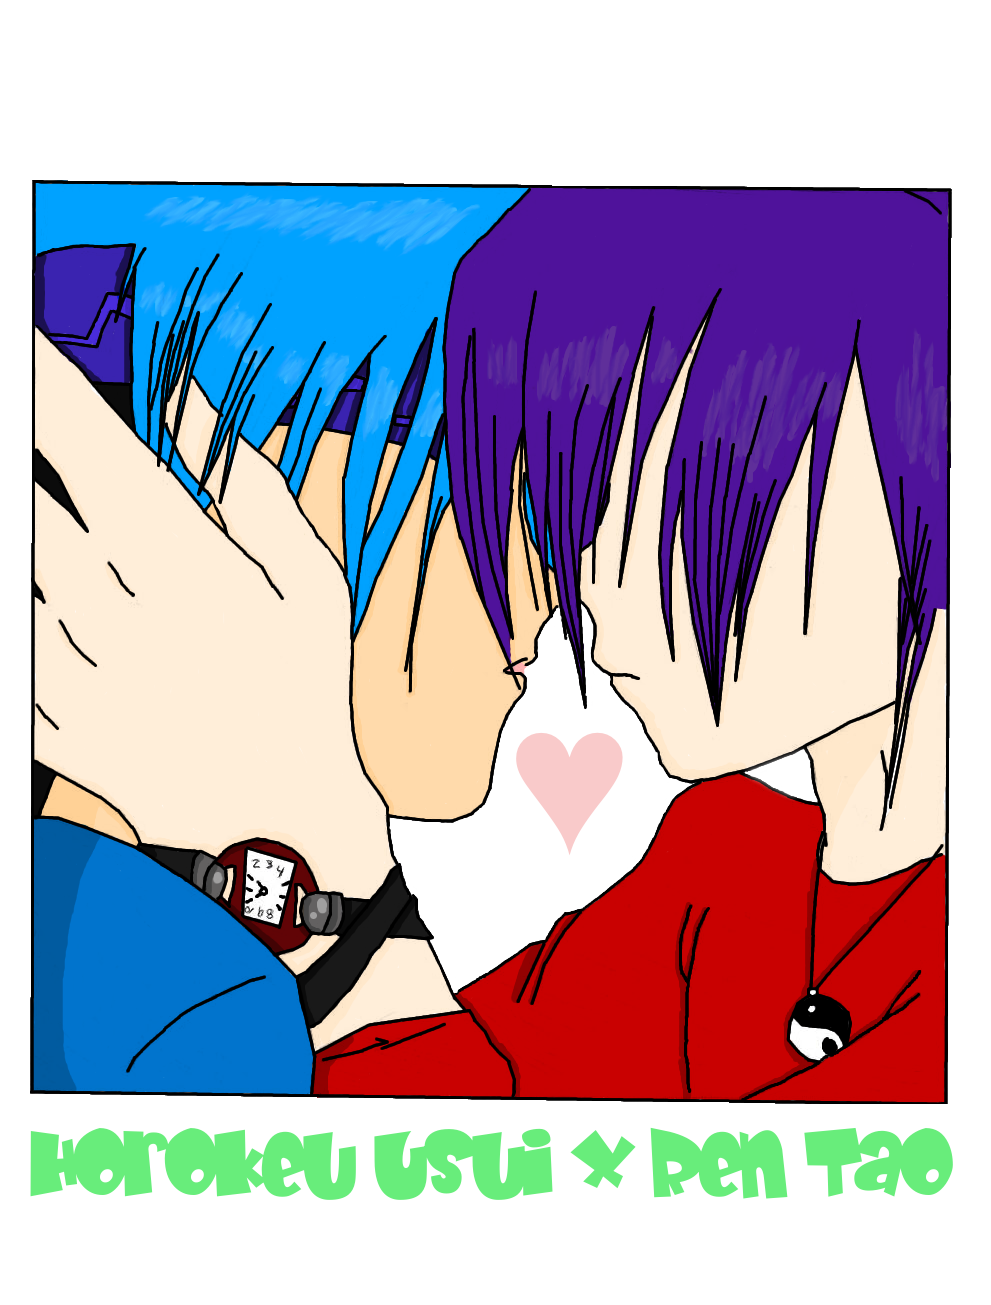 About to Kiss(Colored Version) by kamoku_hito